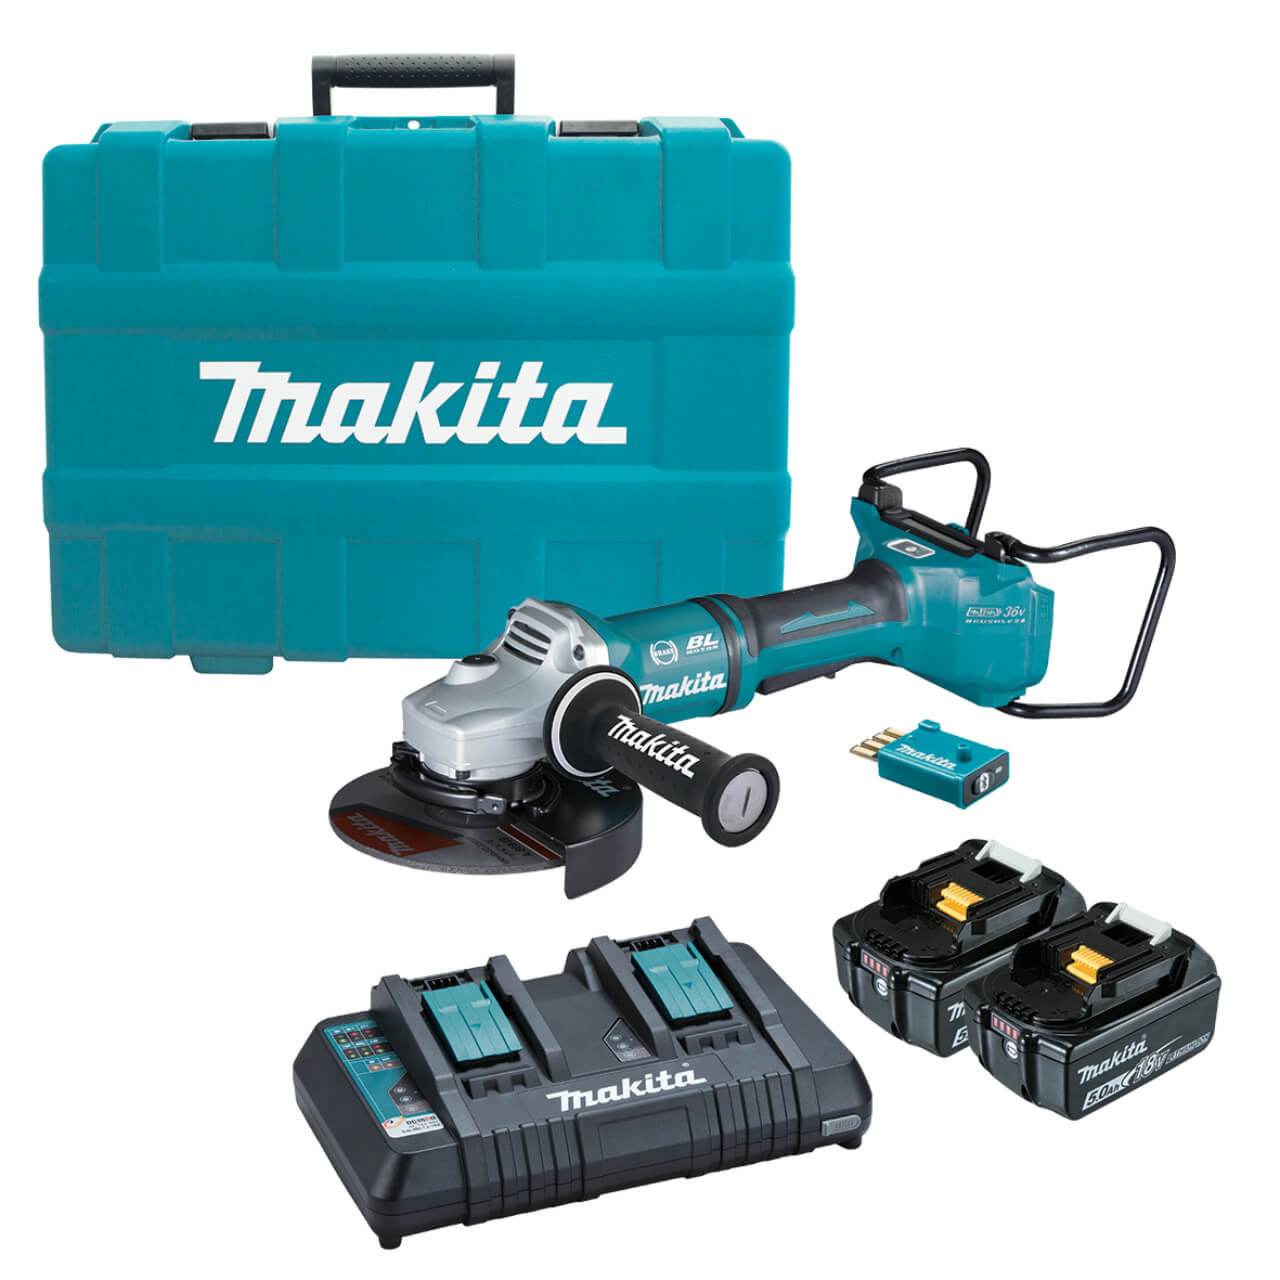 Makita 18Vx2 BRUSHLESS AWS 180mm Paddle Switch Angle Grinder Kit - Includes 2 x 5.0Ah Batteries. Dual Port Rapid Charger & Carry Case